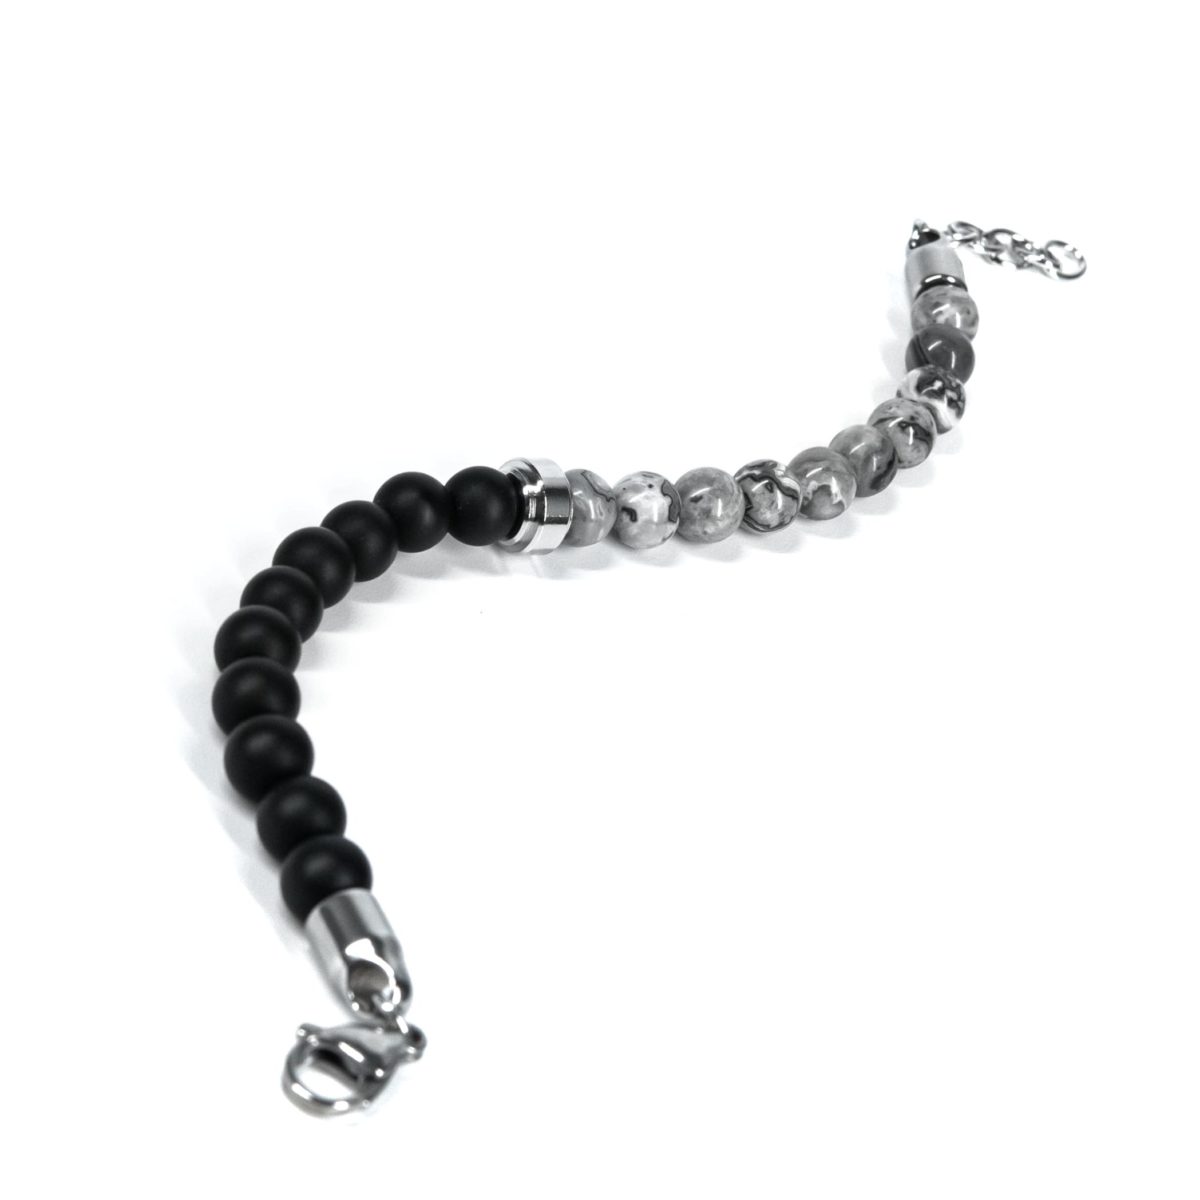 https://m.clubbella.co/product/anson-grey-wave-bracelet/ Anson grey wave bracelet (3)